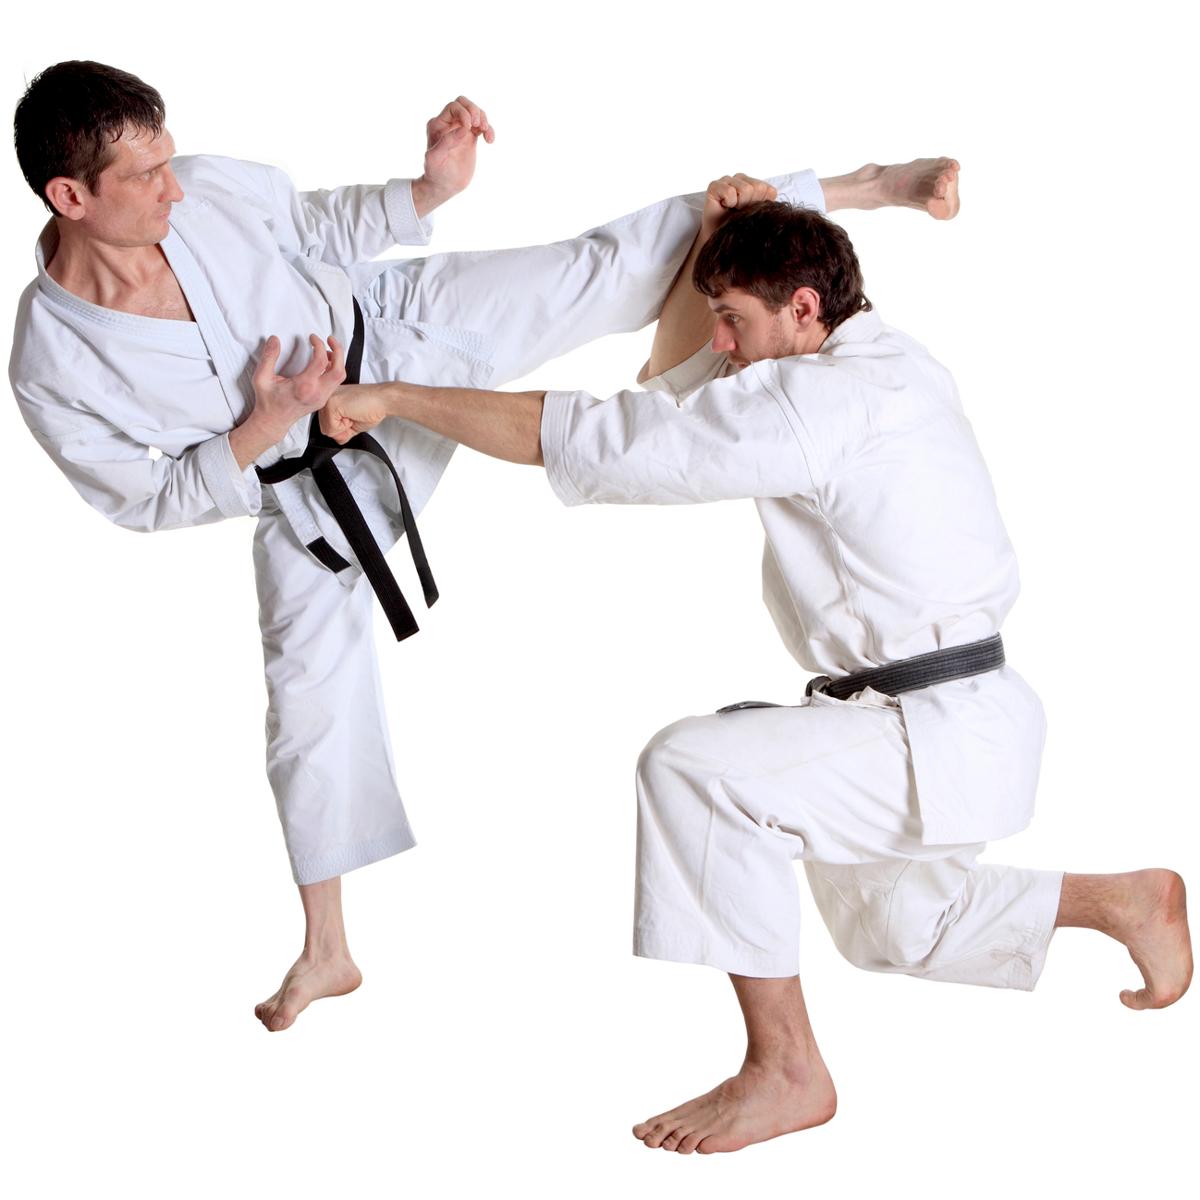 Karate Moves - A Guide to the Basic Blocks, Strikes, and Kicks - Sports